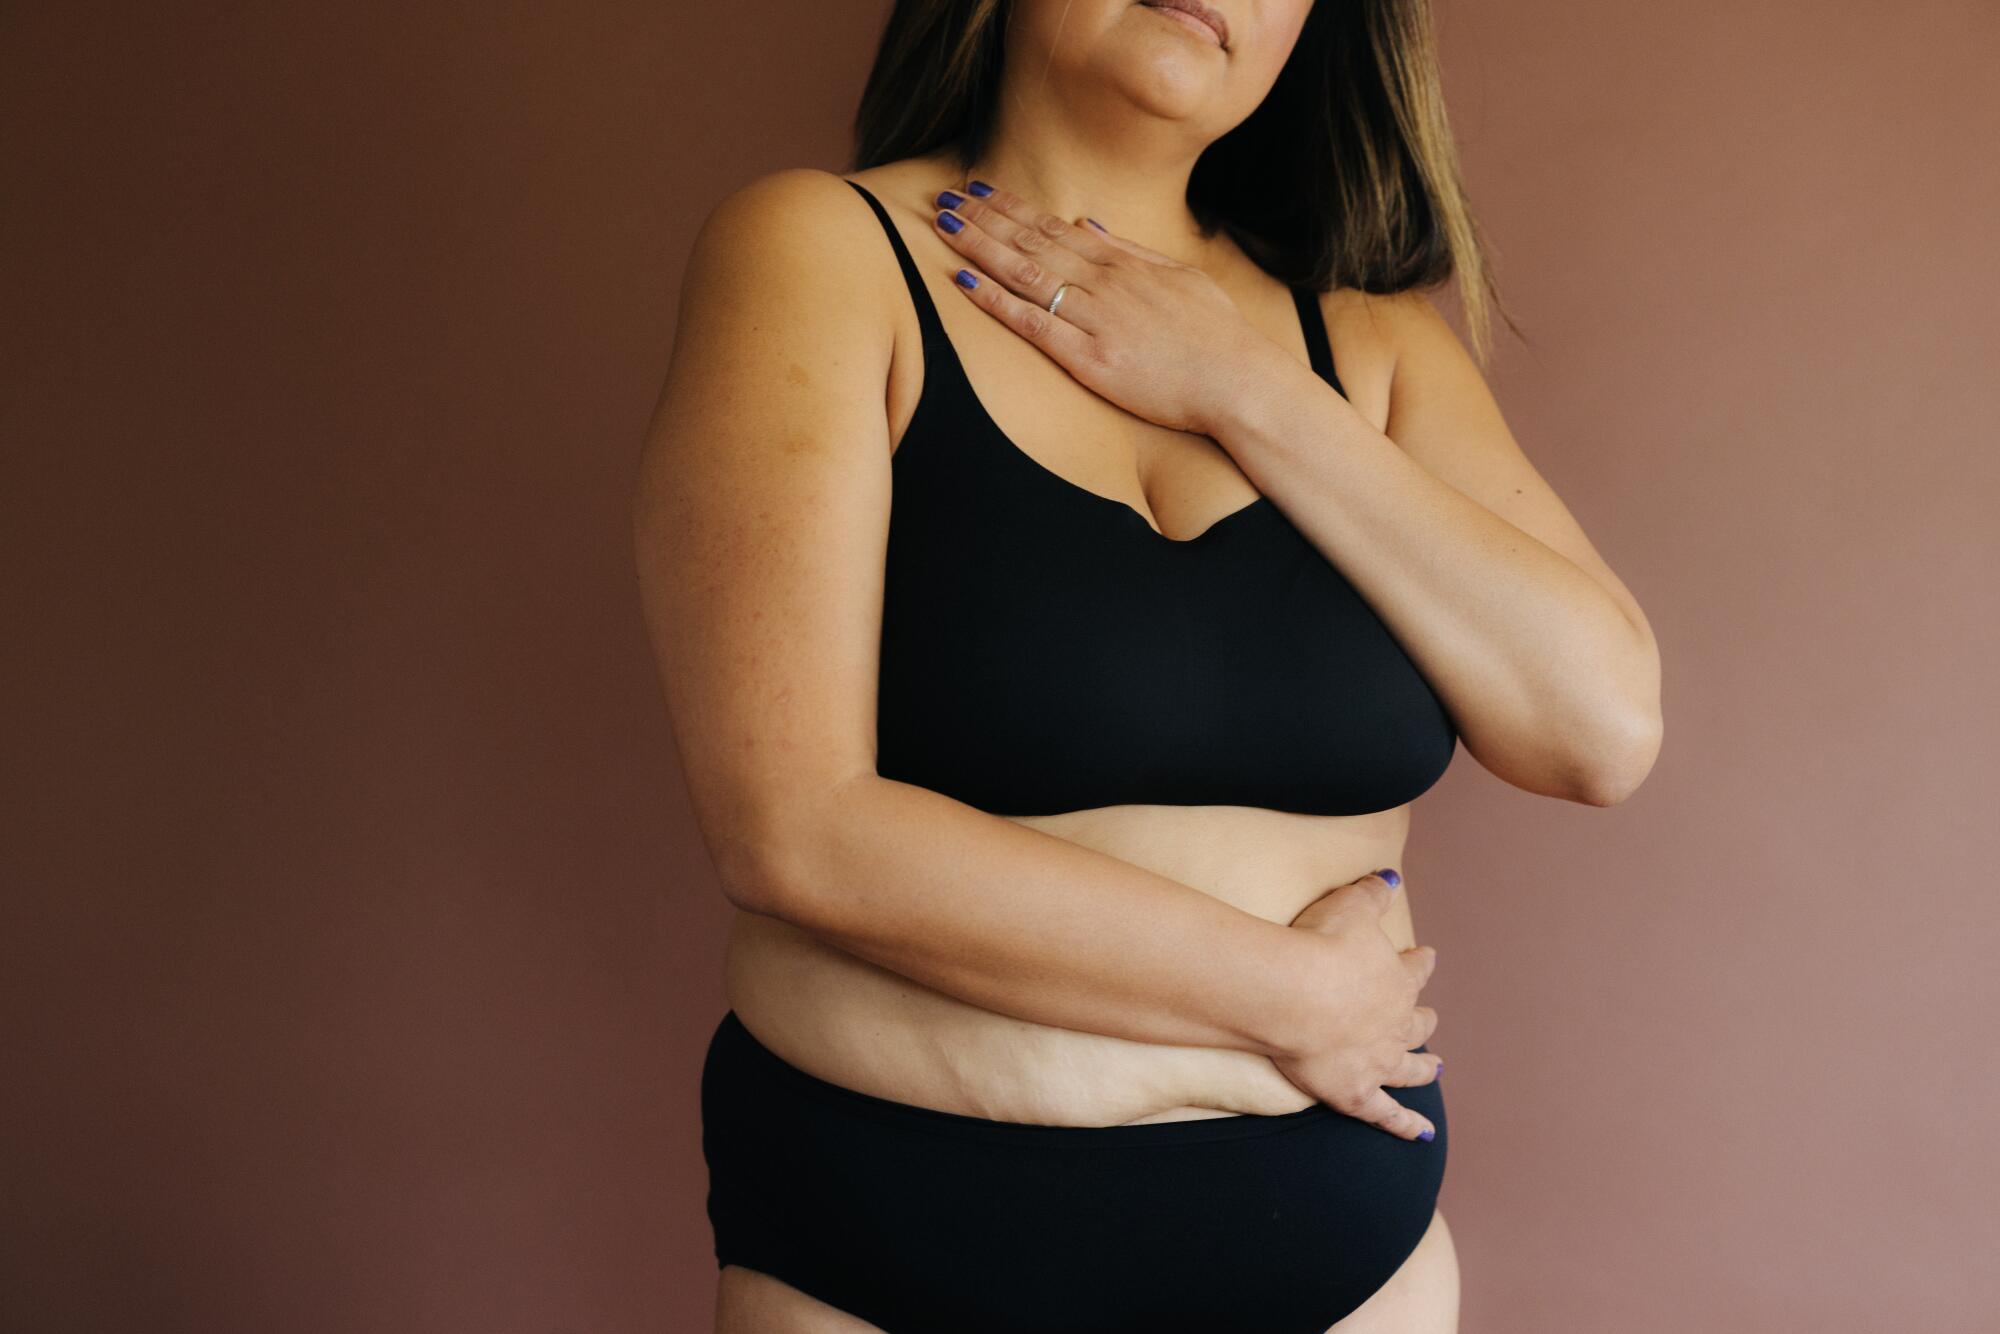 Powerful photos show women's bodies after giving birth - Los